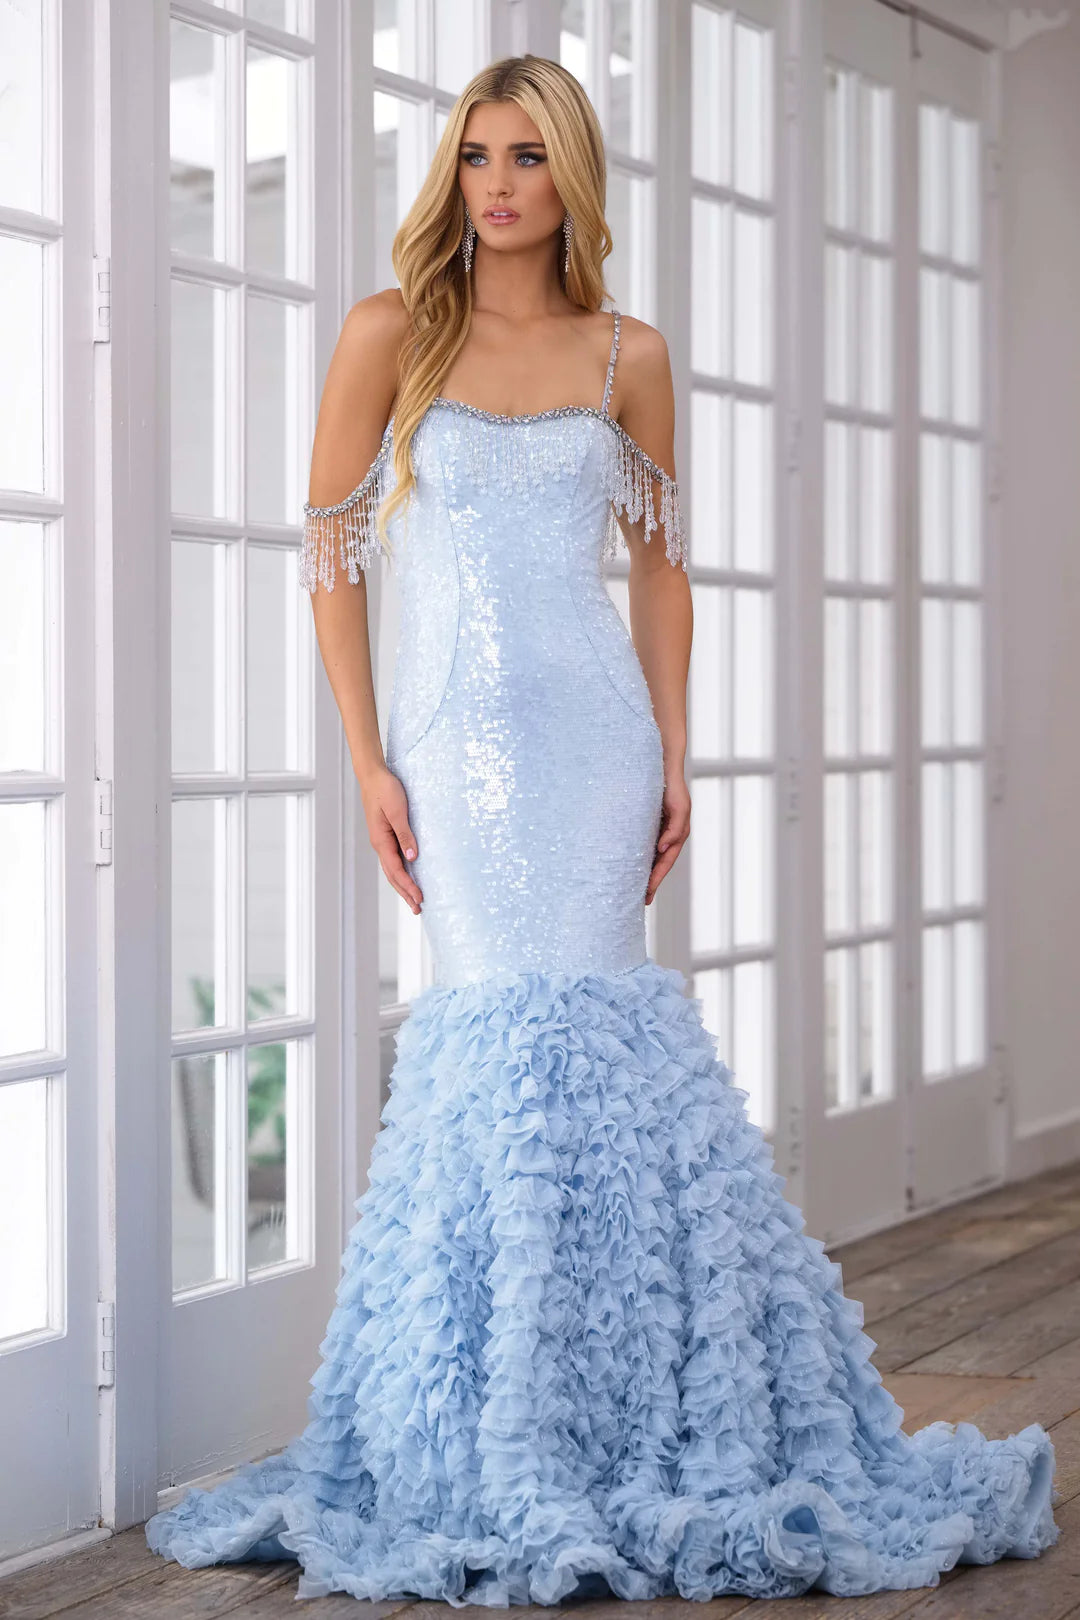 This Mermaid Long Prom Sequin Dress is designed with intricate beaded detailing and layered ruffles, creating a stunning and elegant look. Its fitted silhouette and spaghetti straps make for a flattering and comfortable fit. Perfect for formal events and pageants, this dress will make you feel like a true mermaid.